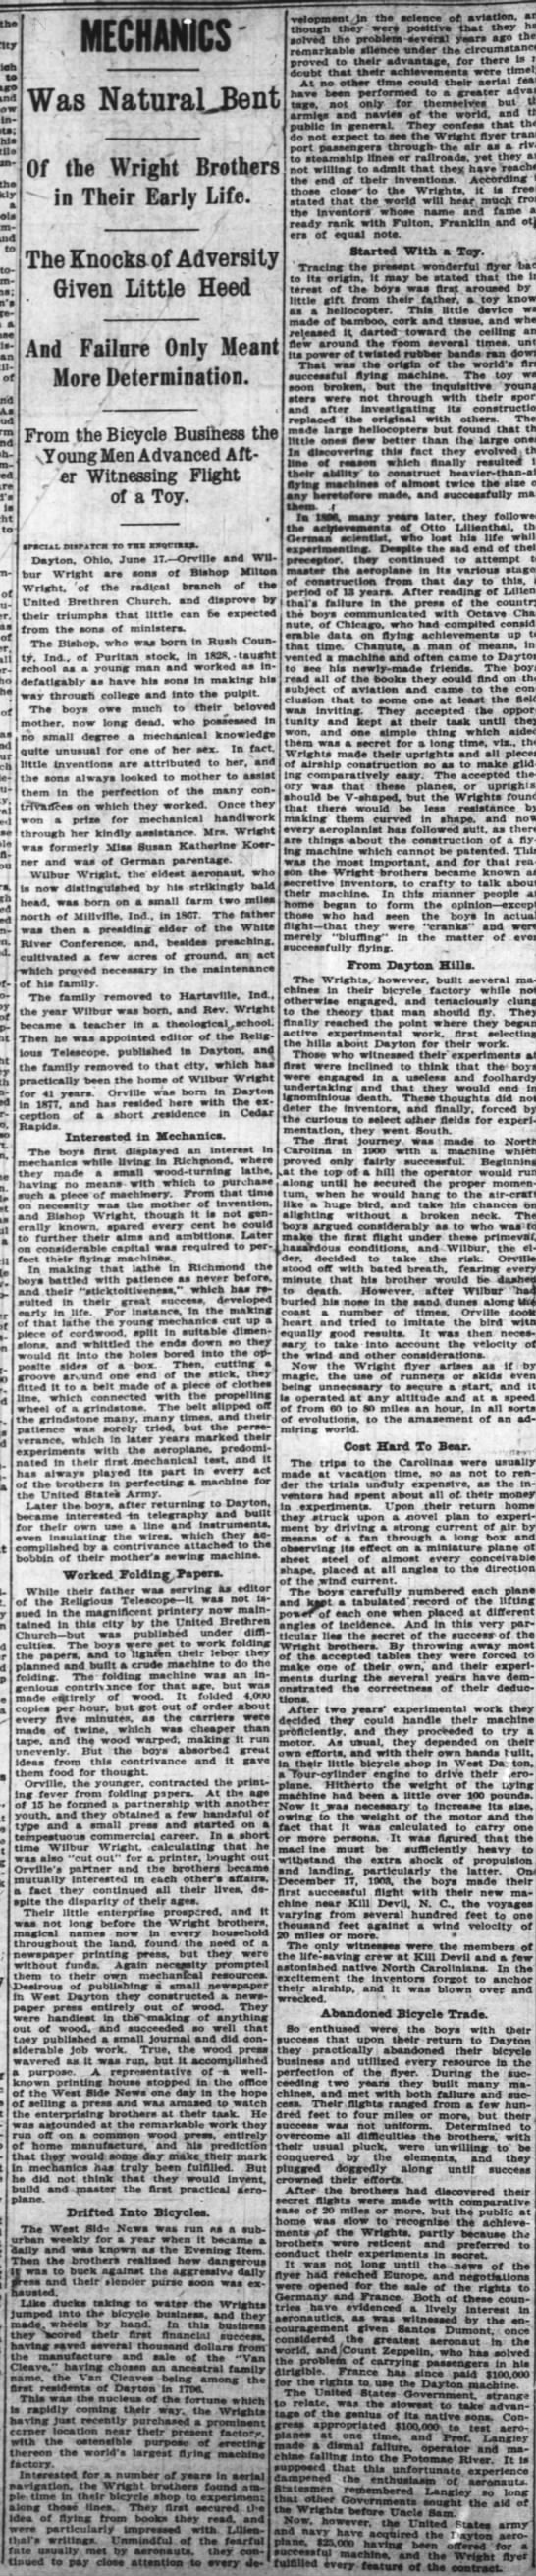 Biographical sketch of the Wright brothers early life featured in 1909 newspaper - 